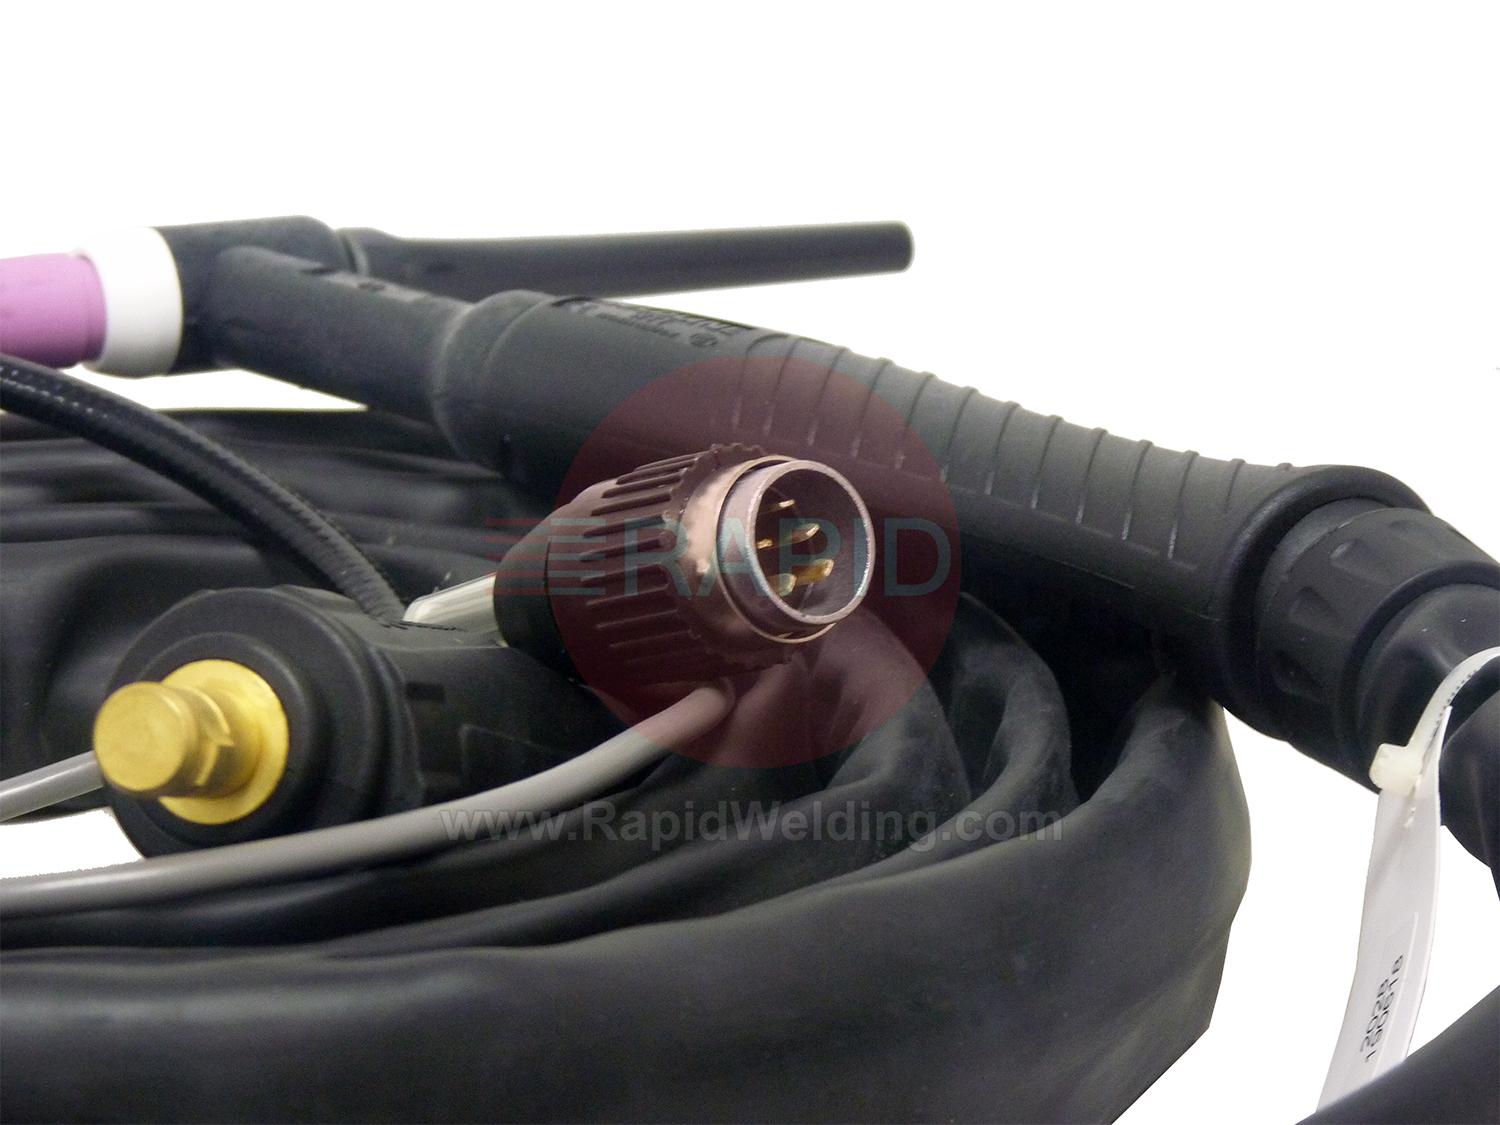 W000278915  Lincoln WTT2 26 EB Air-Cooled TIG Torch with 5 Pin Plug, 8m